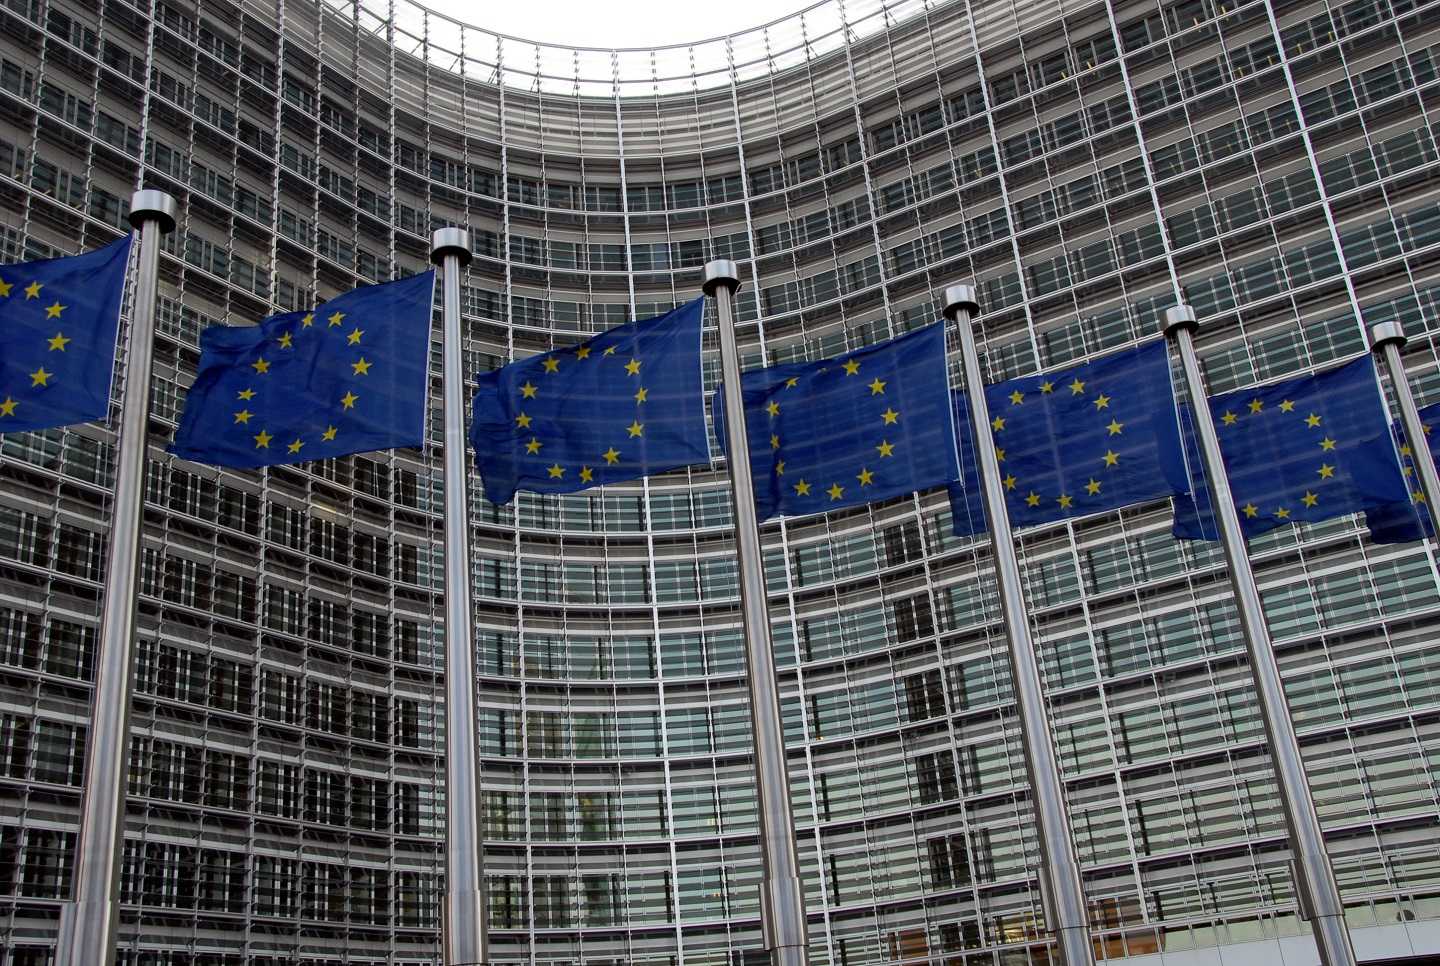 European flags in front of the Berlaymont Building, Headquarters of the EC